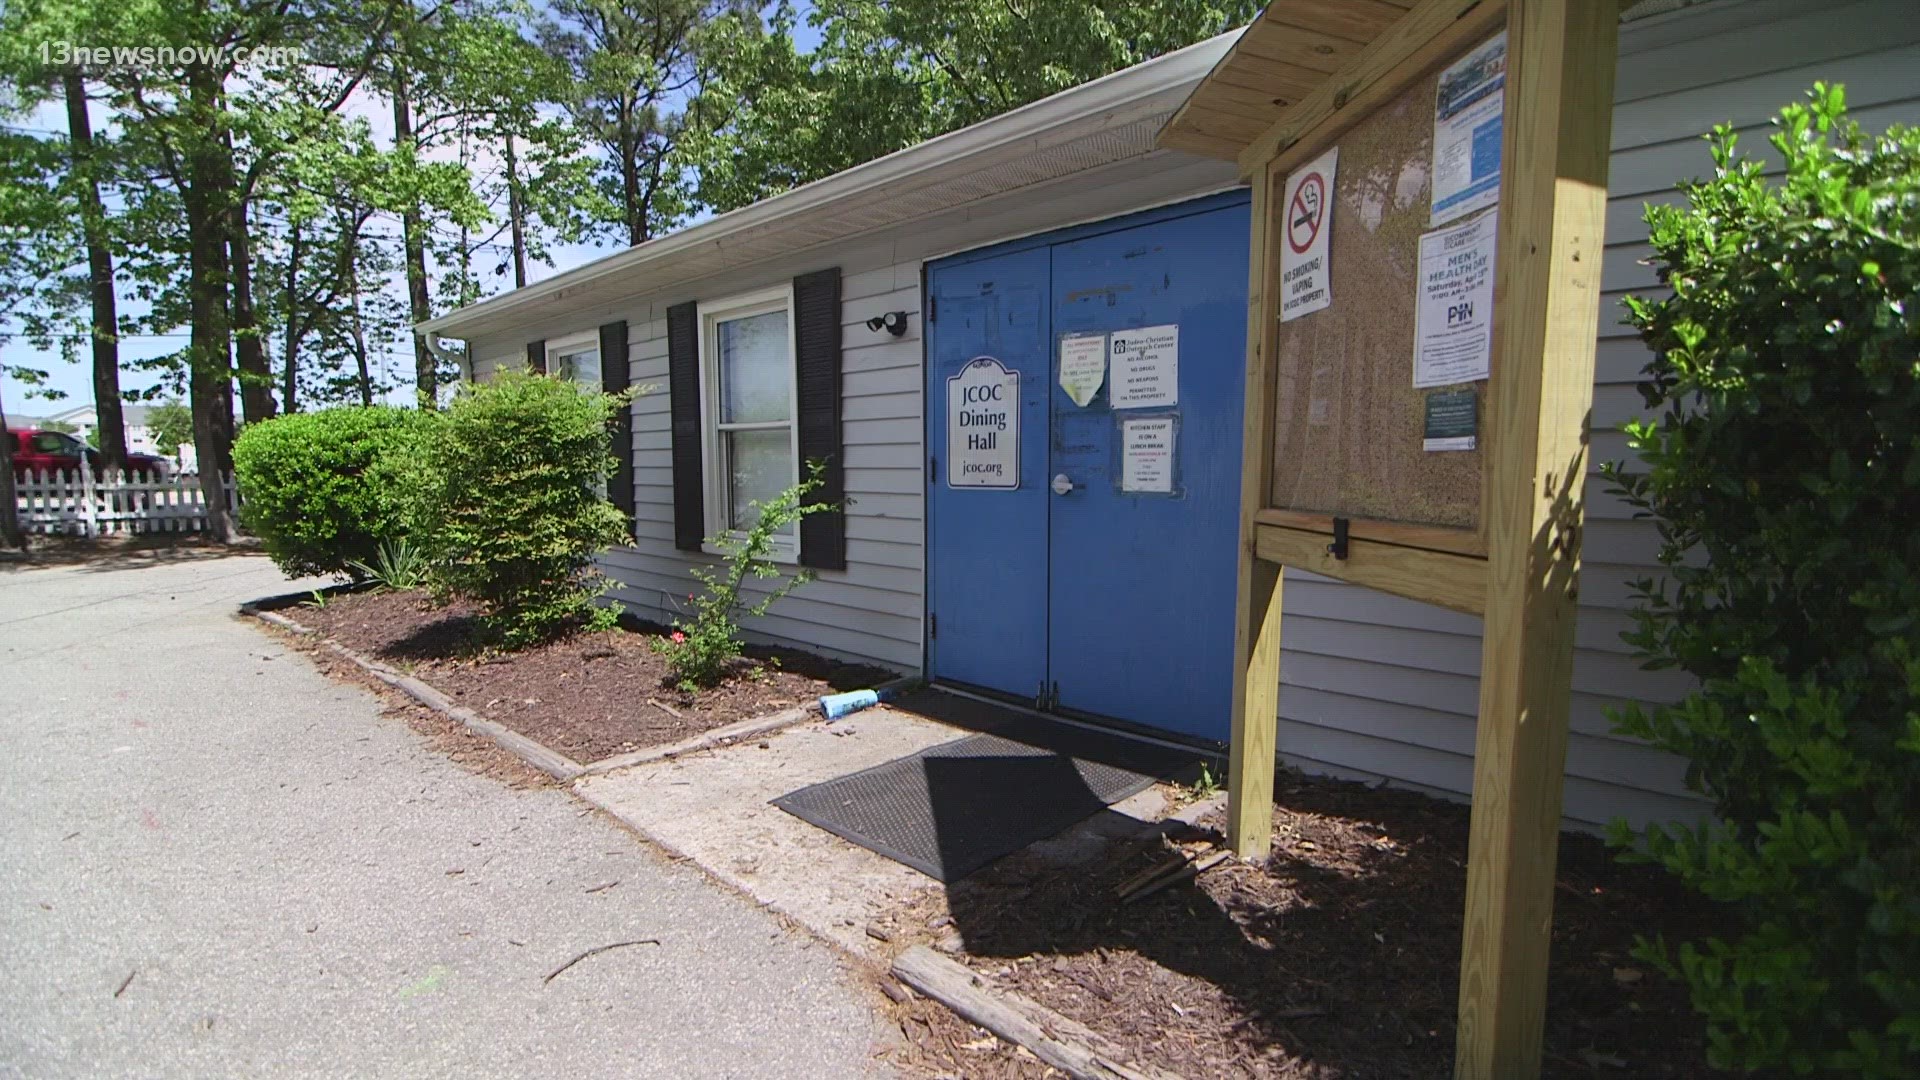 The center has been known for over three decades for the hot meals they provide for the homeless in Virginia Beach, as well as other important resources.